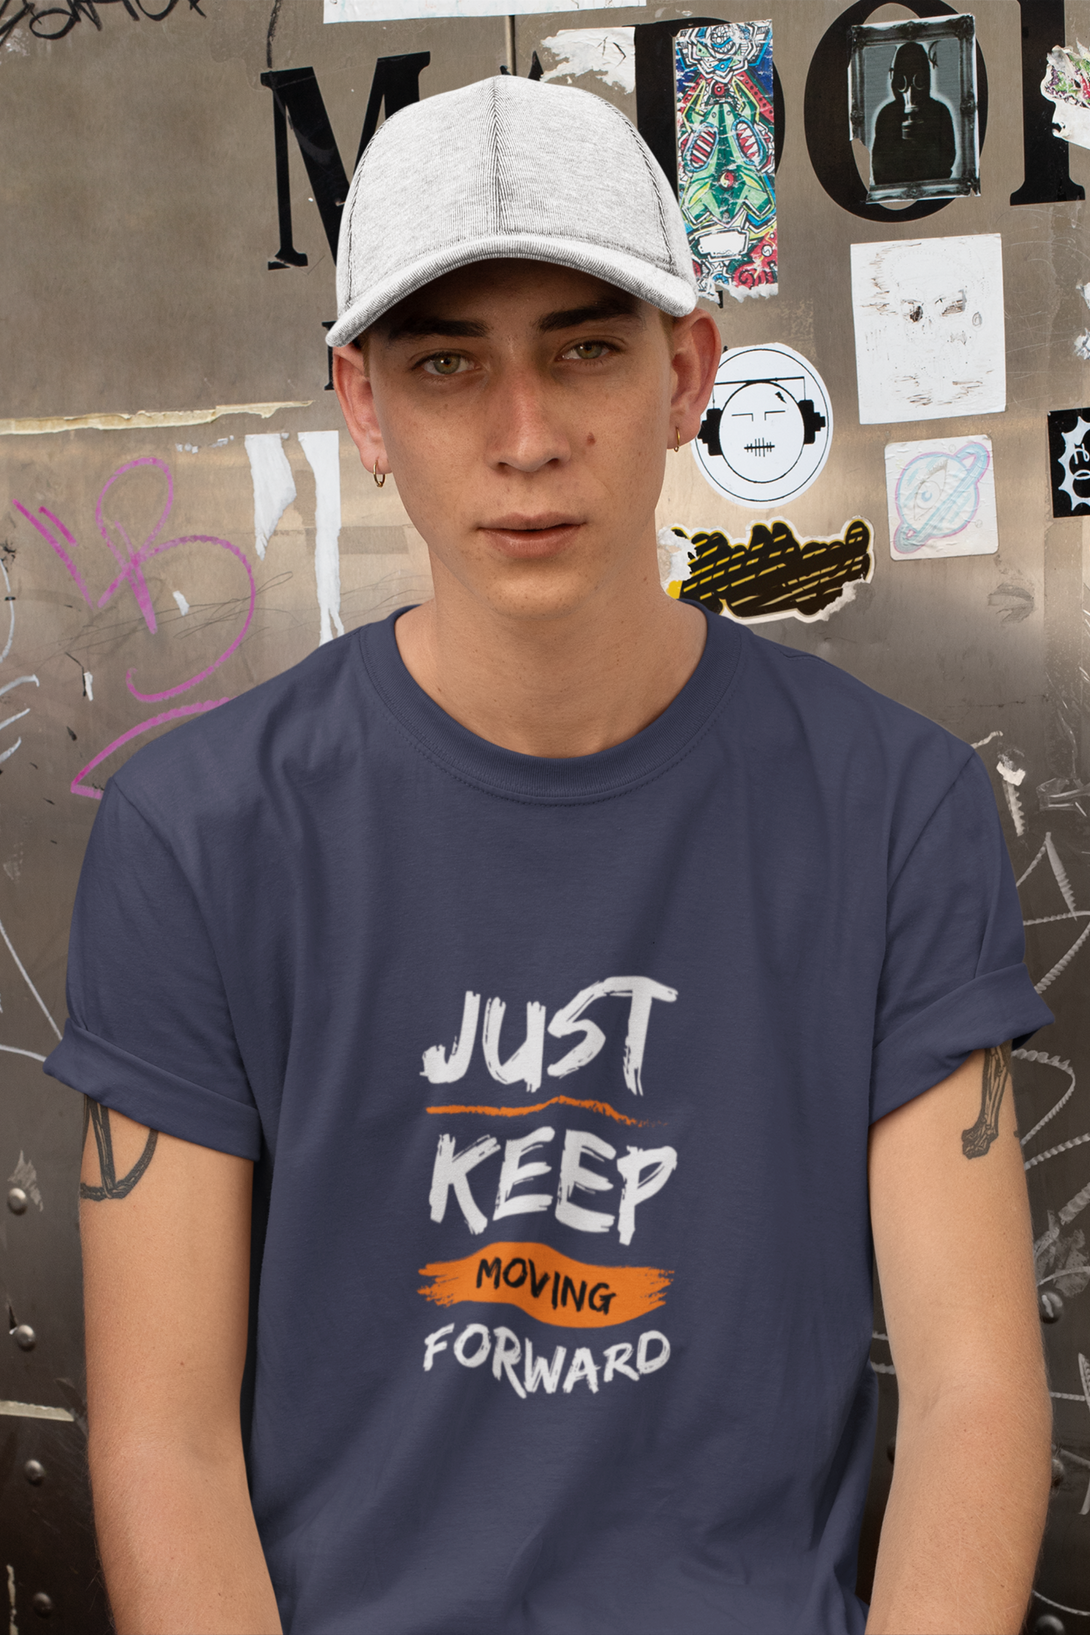 Keep Moving Forward Printed T-Shirt For Men - WowWaves - 4